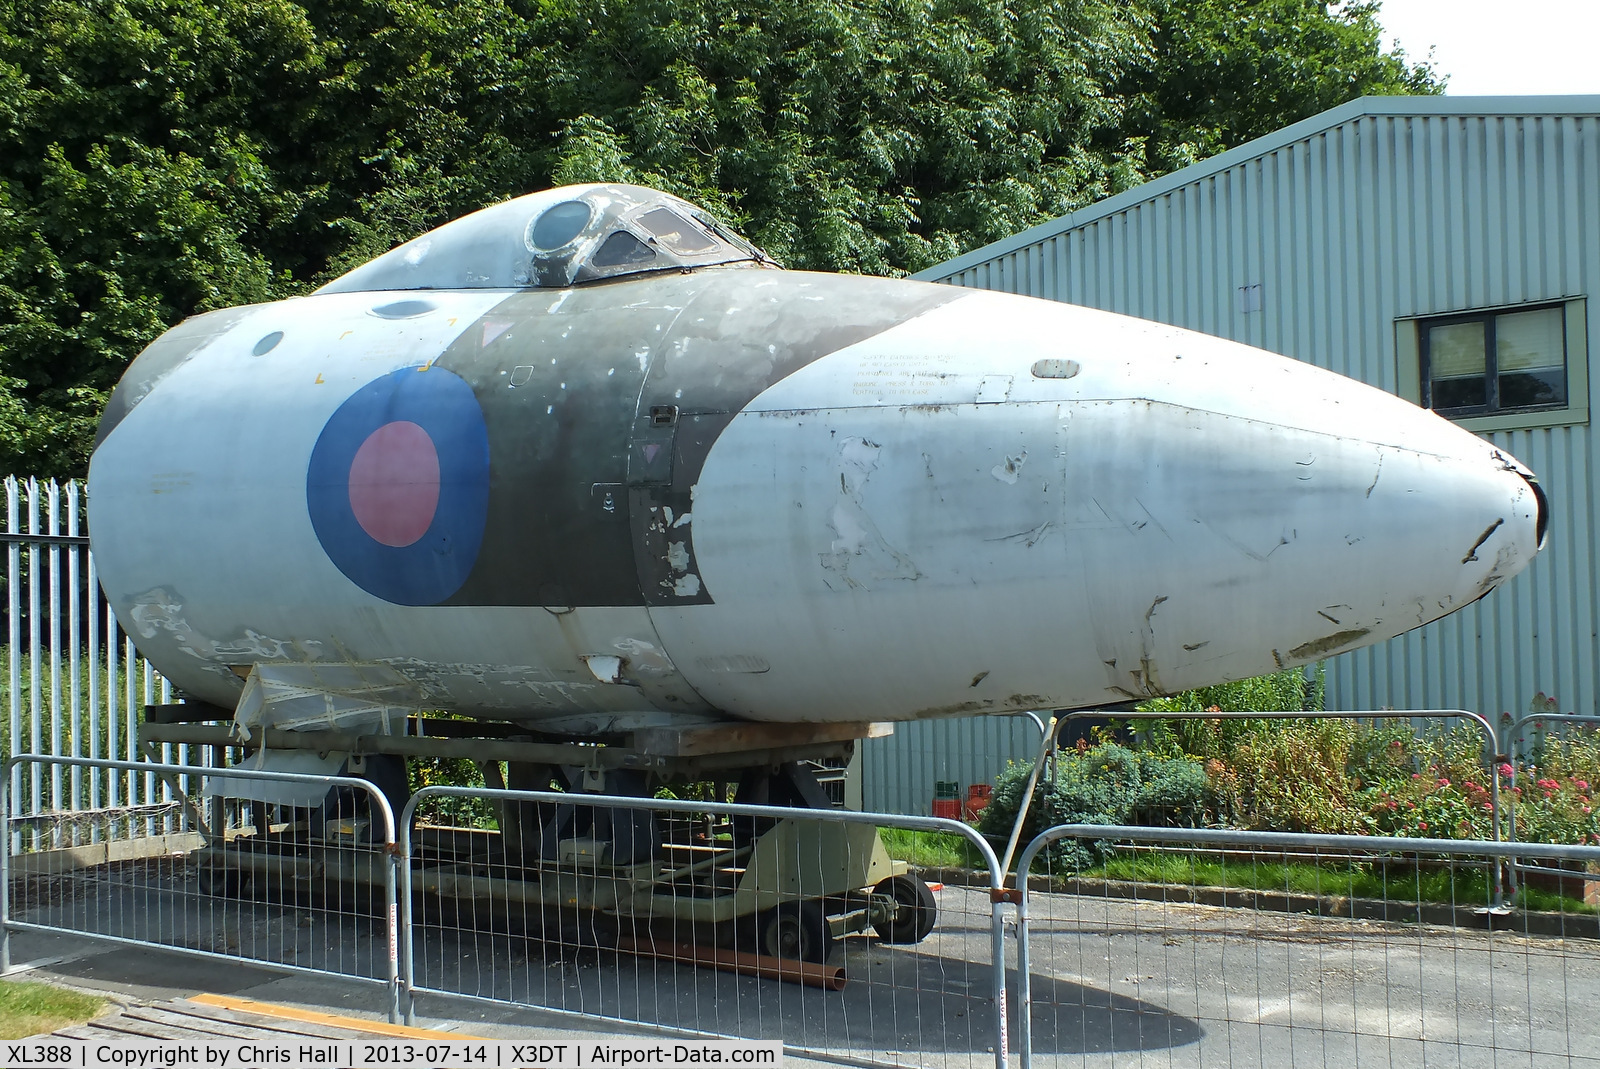 XL388, 1962 Avro Vulcan B.2 C/N Set 38, preserved at the South Yorkshire Aircraft Museum, AeroVenture, Doncaster